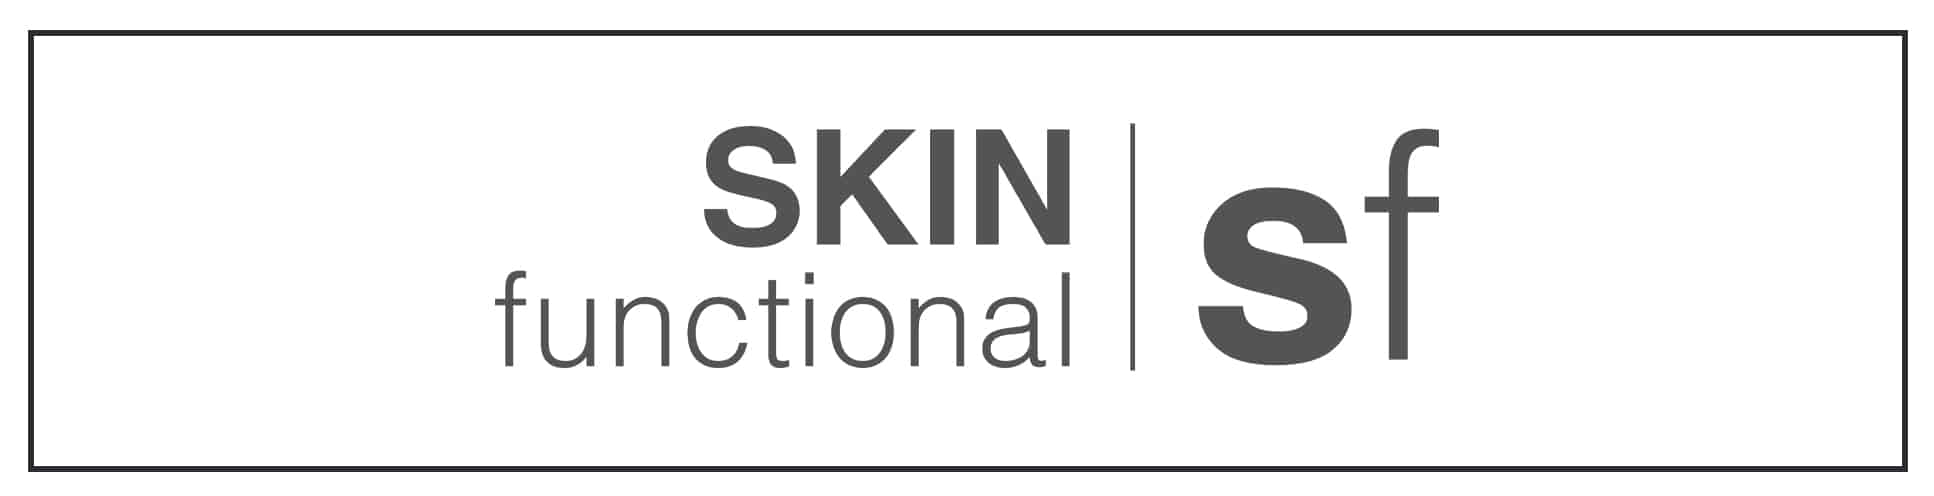 Skin s functional logo on a white background.